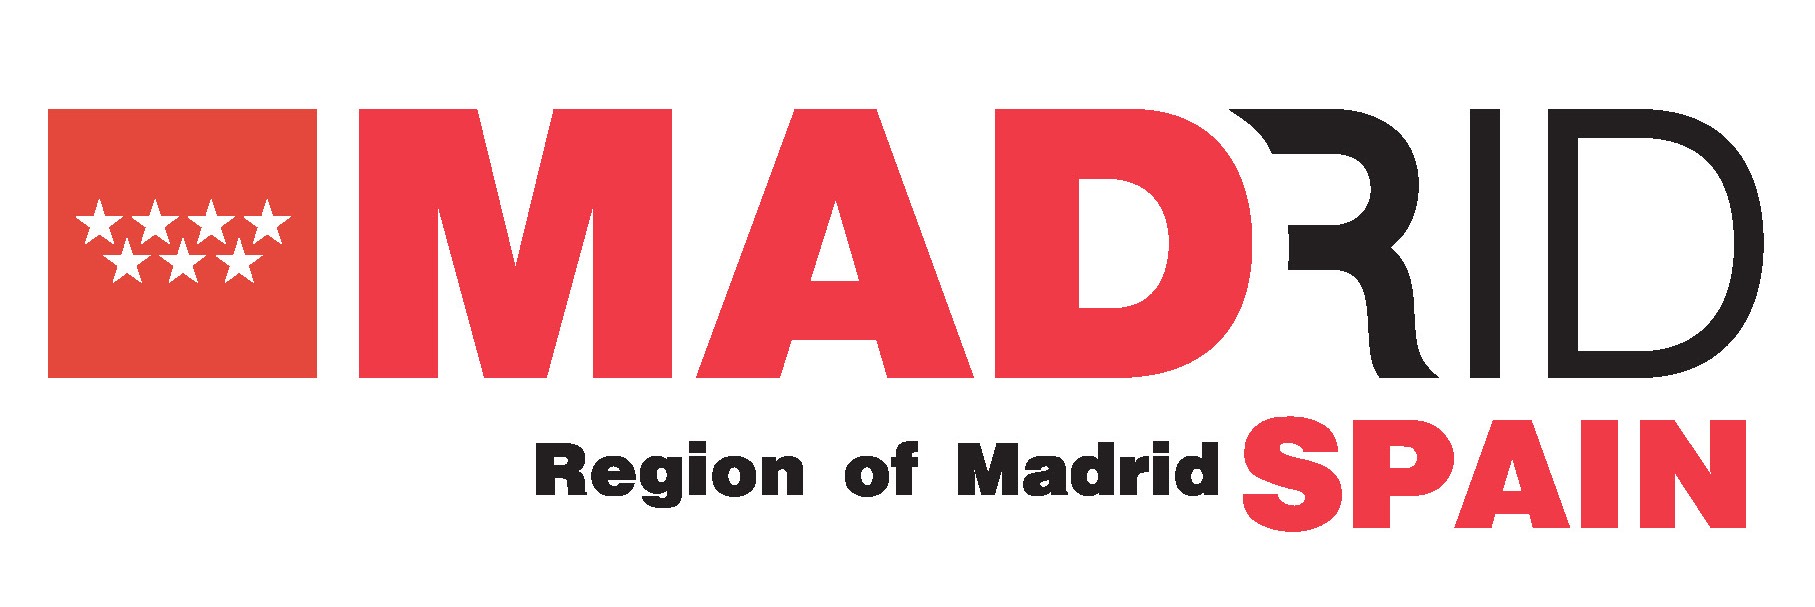 The Awards were generously supported by the Tourism Association of Madrid